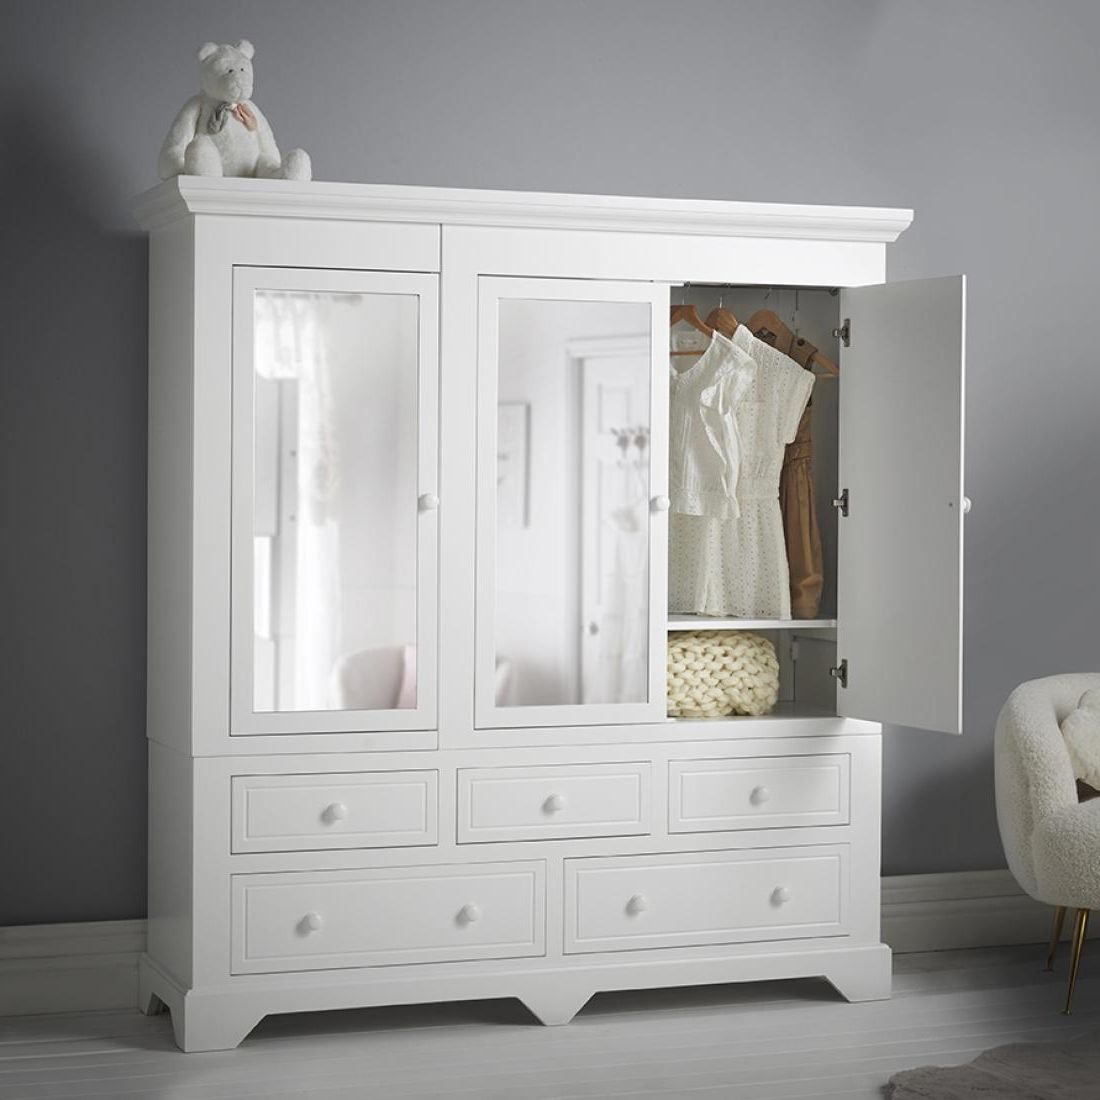 Evie Crabtree Mirrored 3 Door Combination Wardrobe | Luxury Children's  Furniture With Wardrobes And Chest Of Drawers Combined (View 12 of 20)